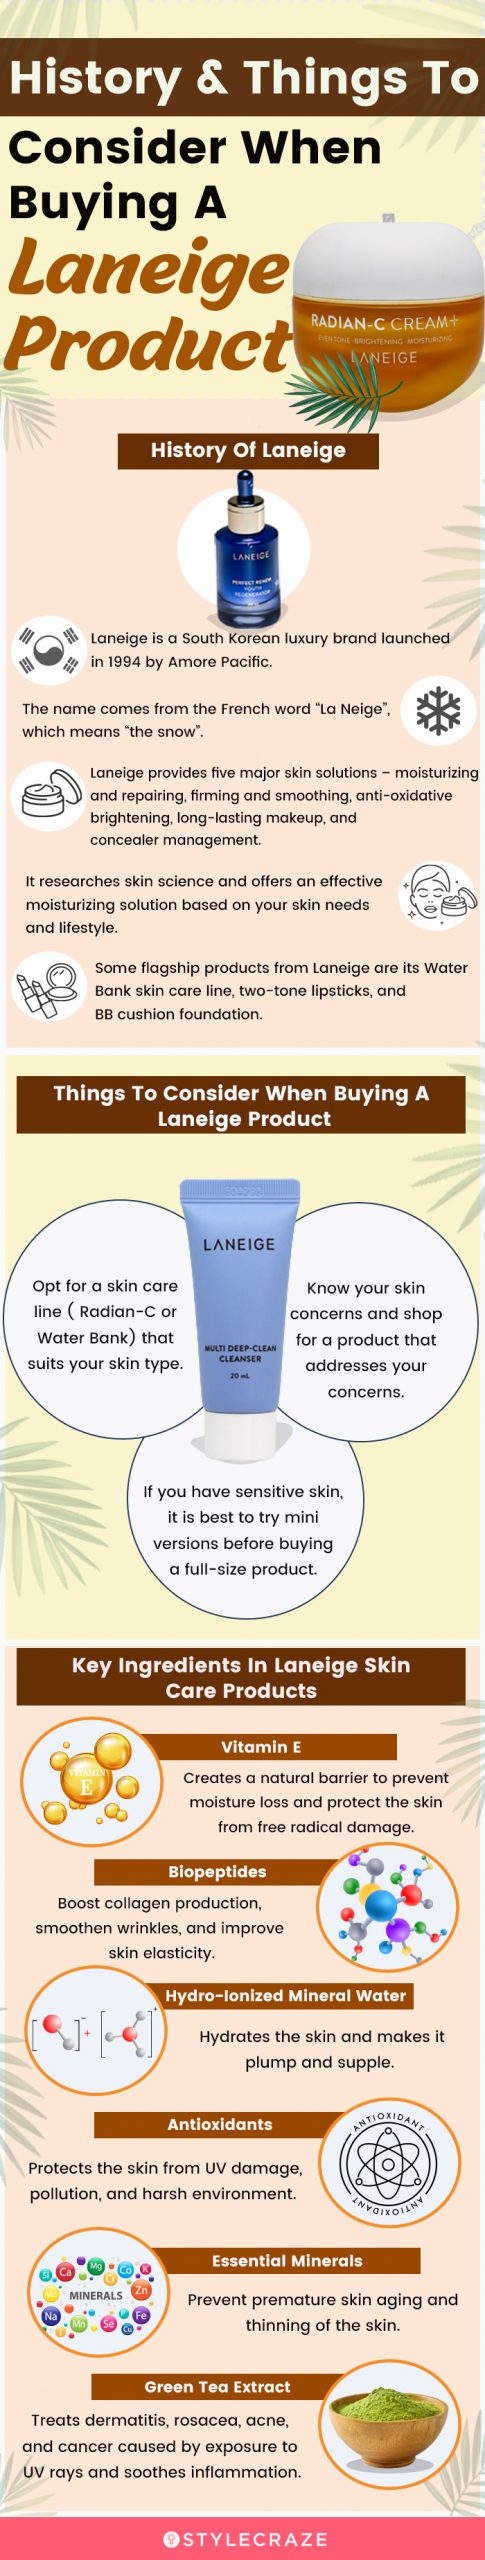 History & Things To Consider When Buying A Laneige Product (infographic)